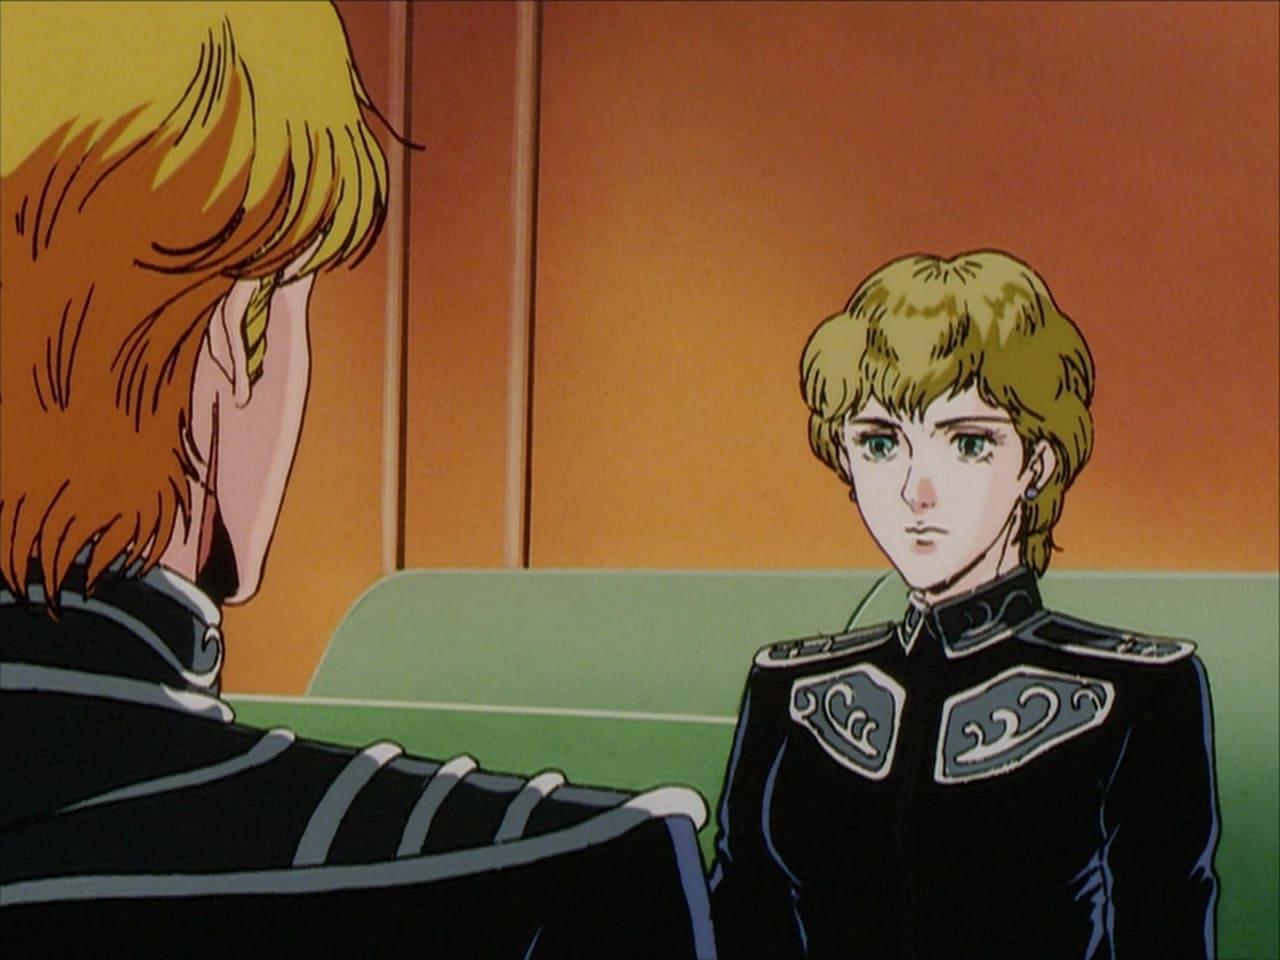 Legend of the Galactic Heroes - Season 2 Episode 27 : A Sudden Change